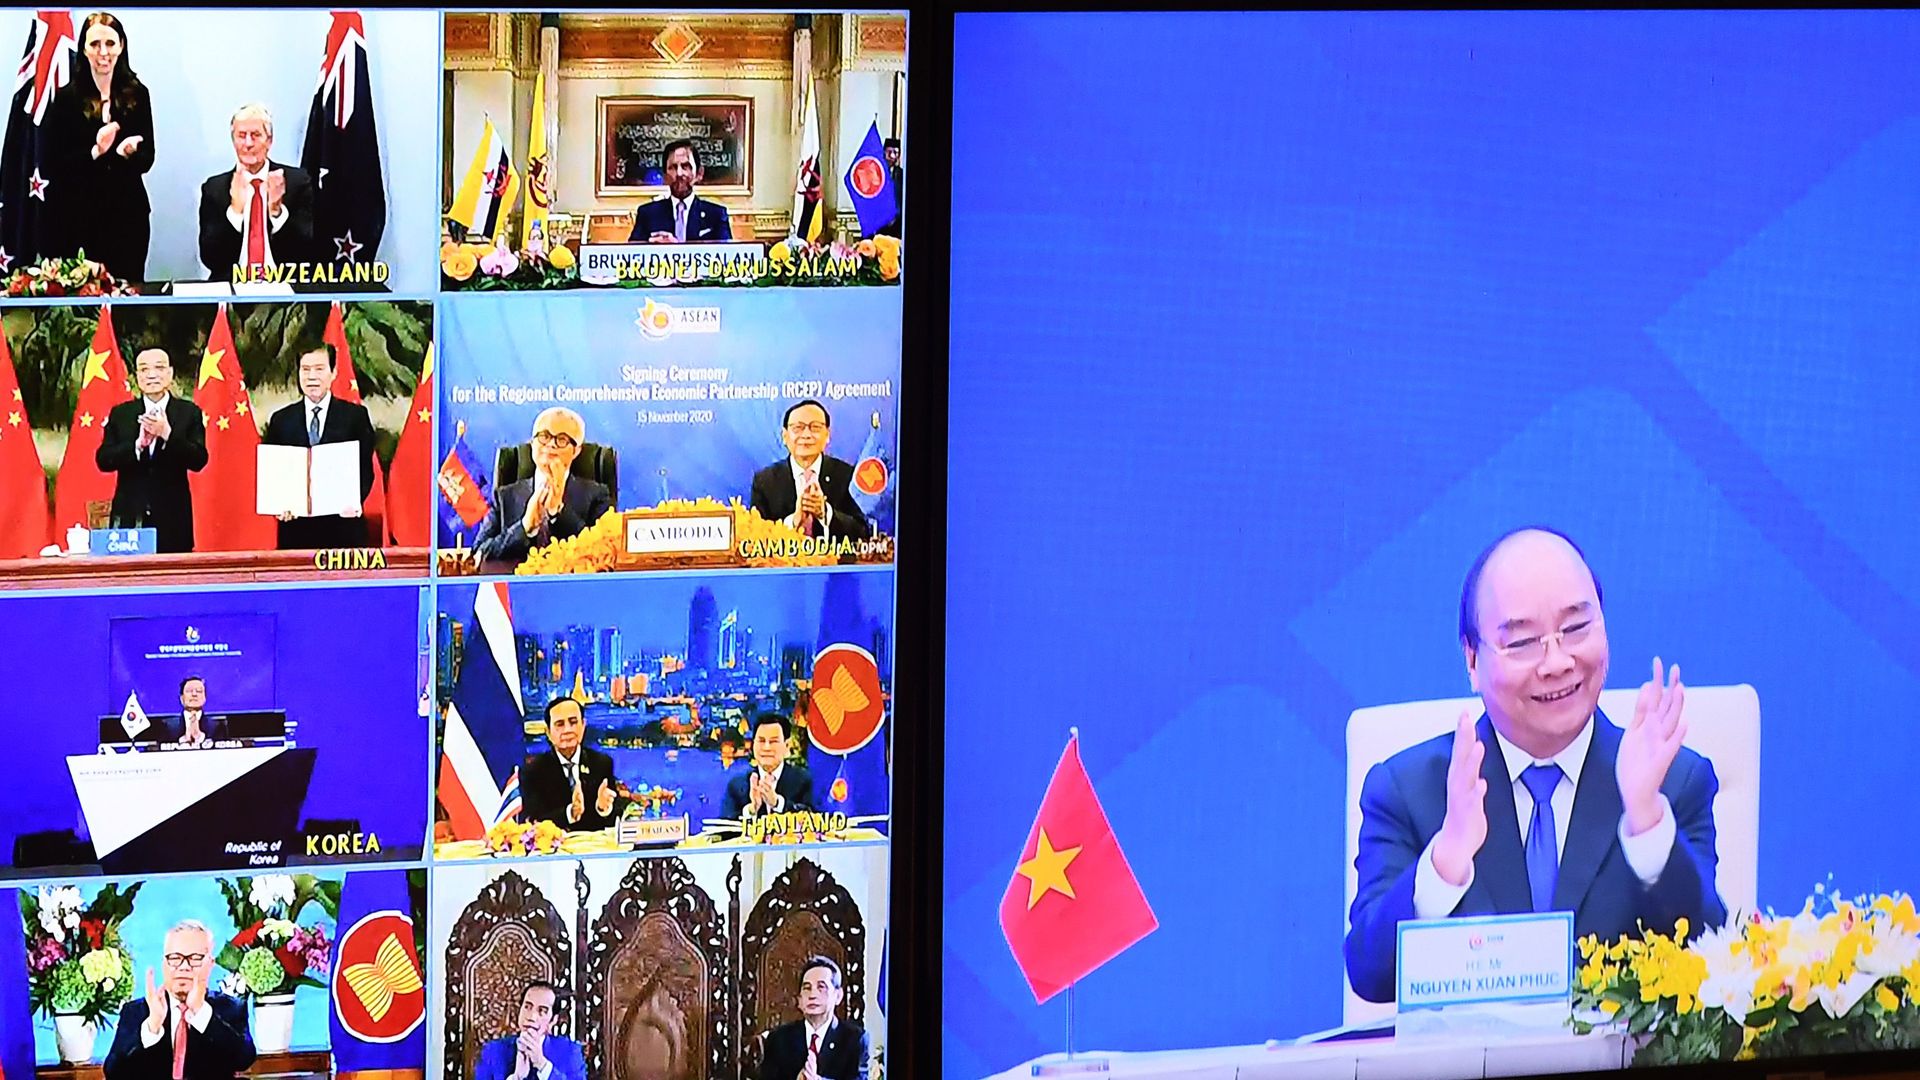 Vietnam's Prime Minister Nguyen Xuan Phuc (R) clapping next to other country signatories during the signing ceremony for the Regional Comprehensive Economic Partnership (RCEP) trade pact